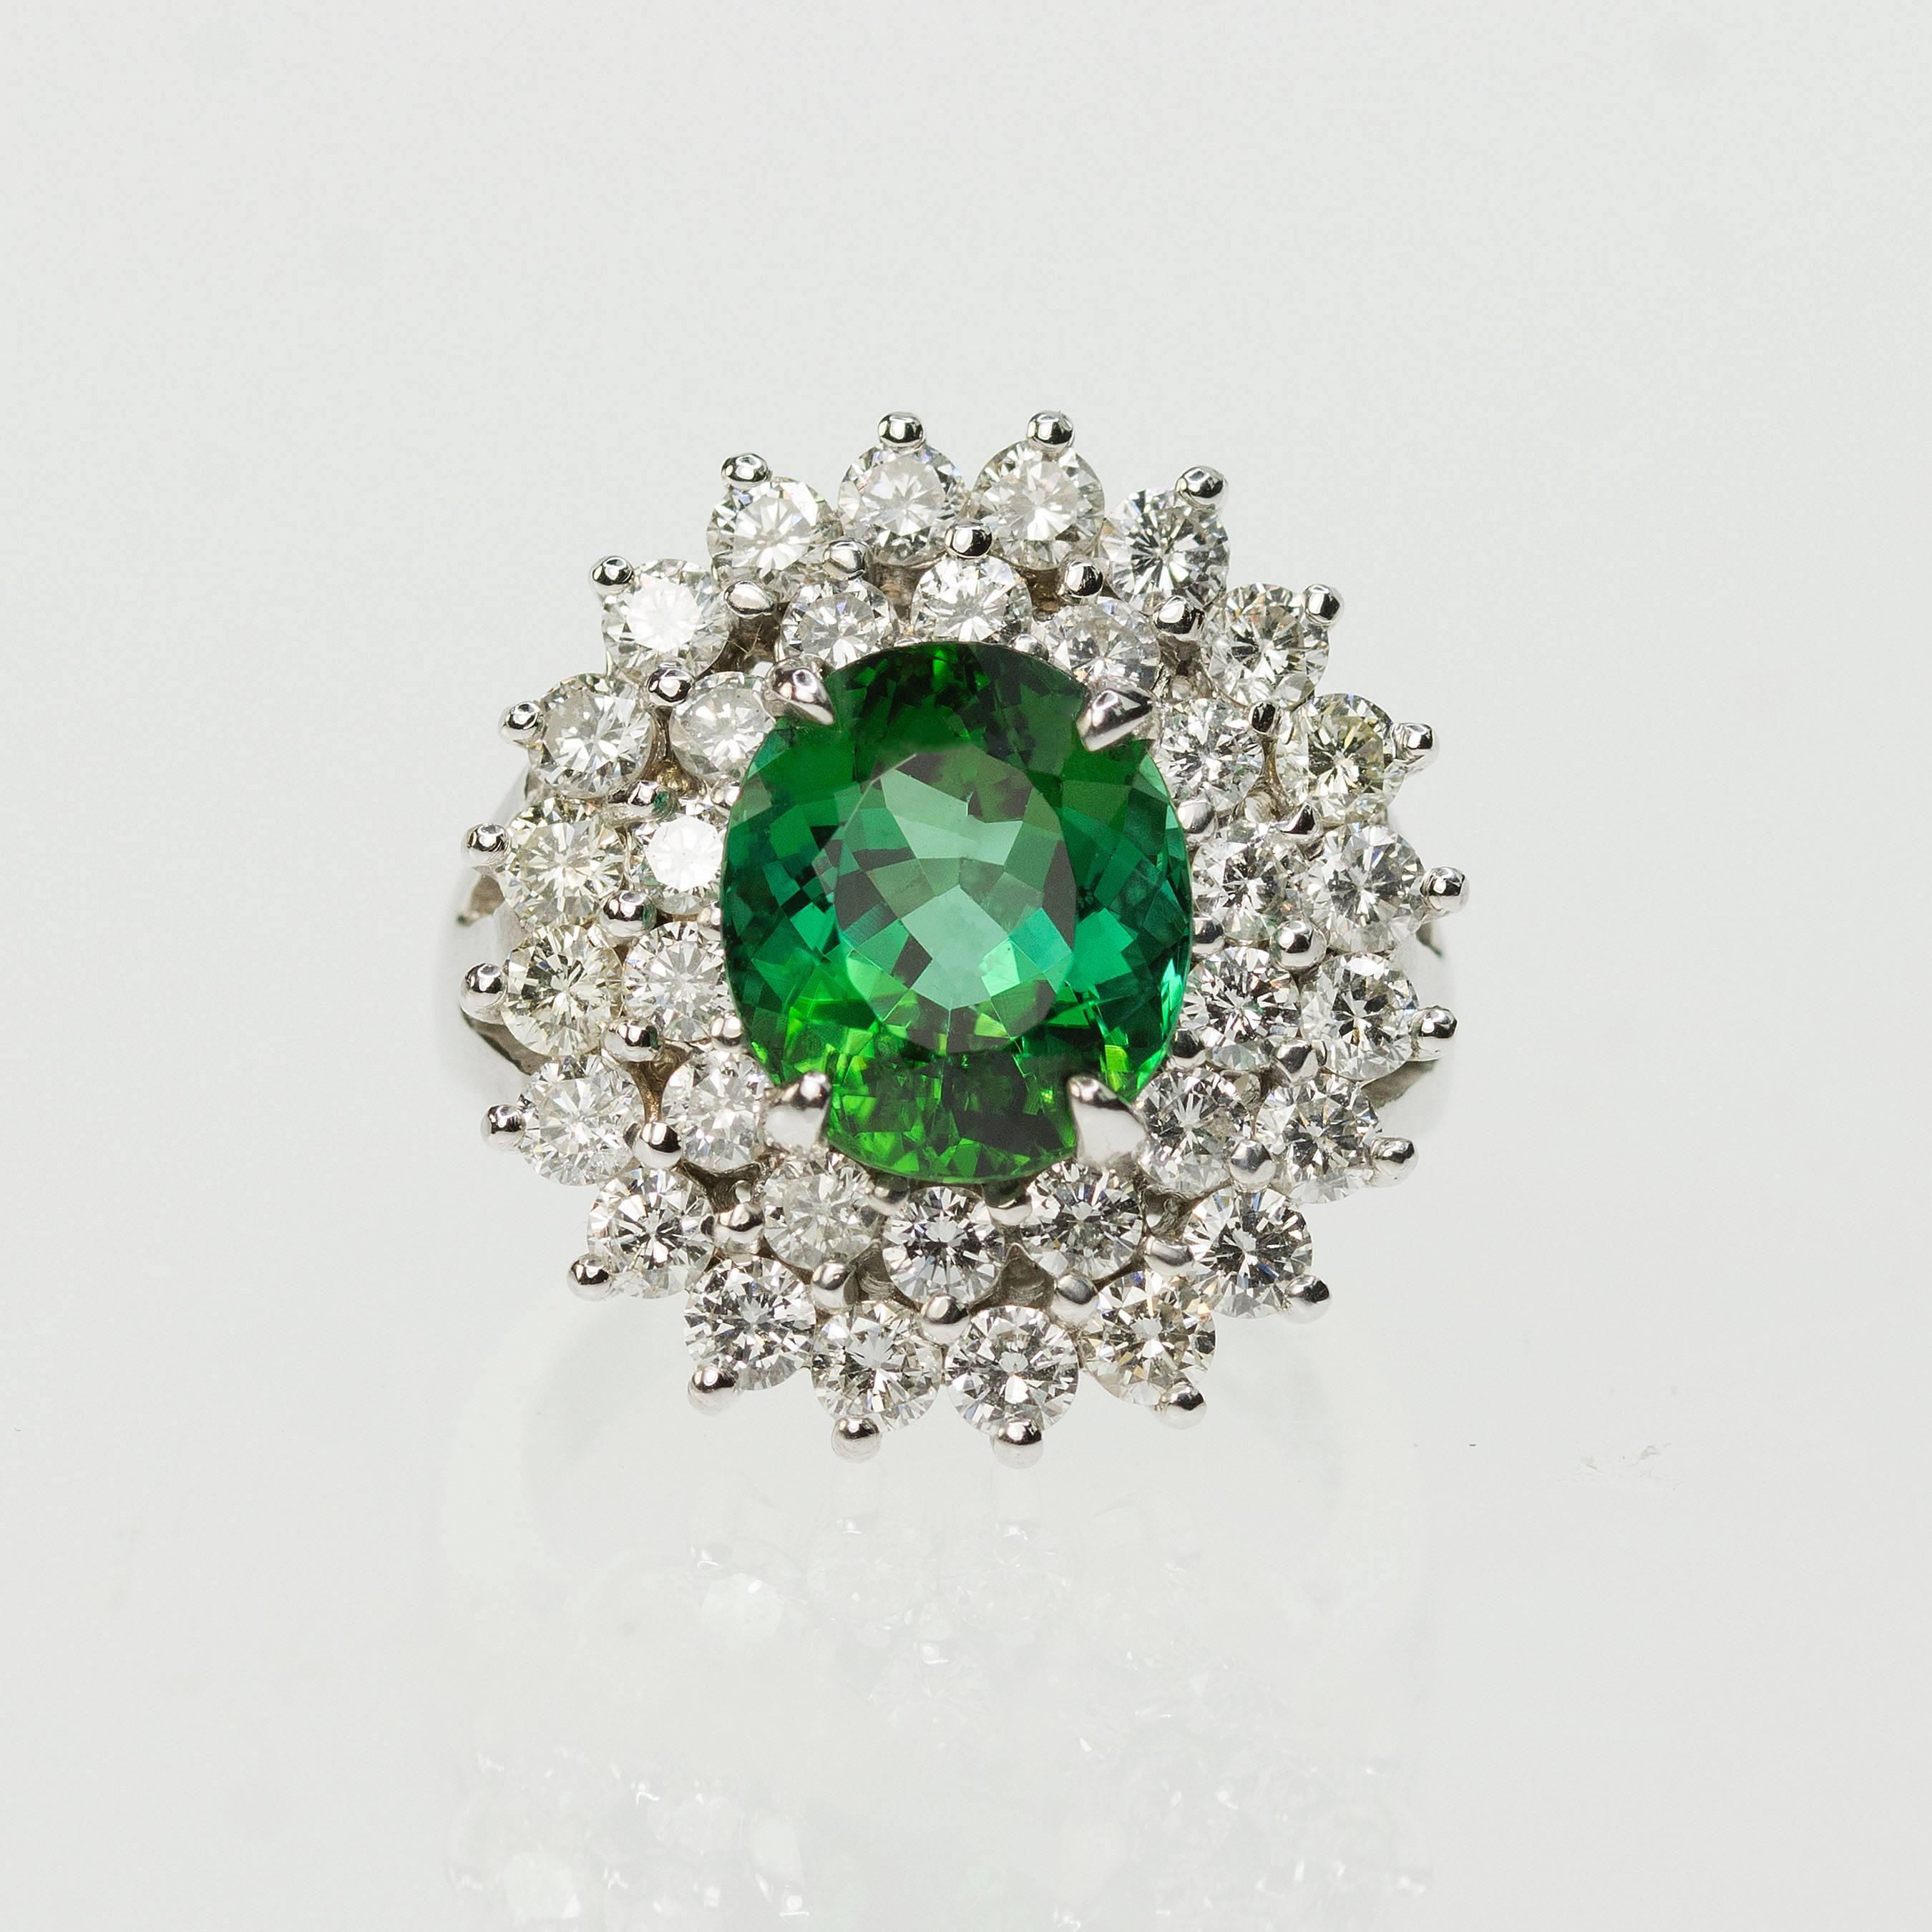 14k White gold ring with gorgeous oval green tourmaline weighing approximate  4.25 carats and 34 round brilliant diamonds weighing approximately 2.25 carats and being F-G in color and VS1-VS2 in clarity.